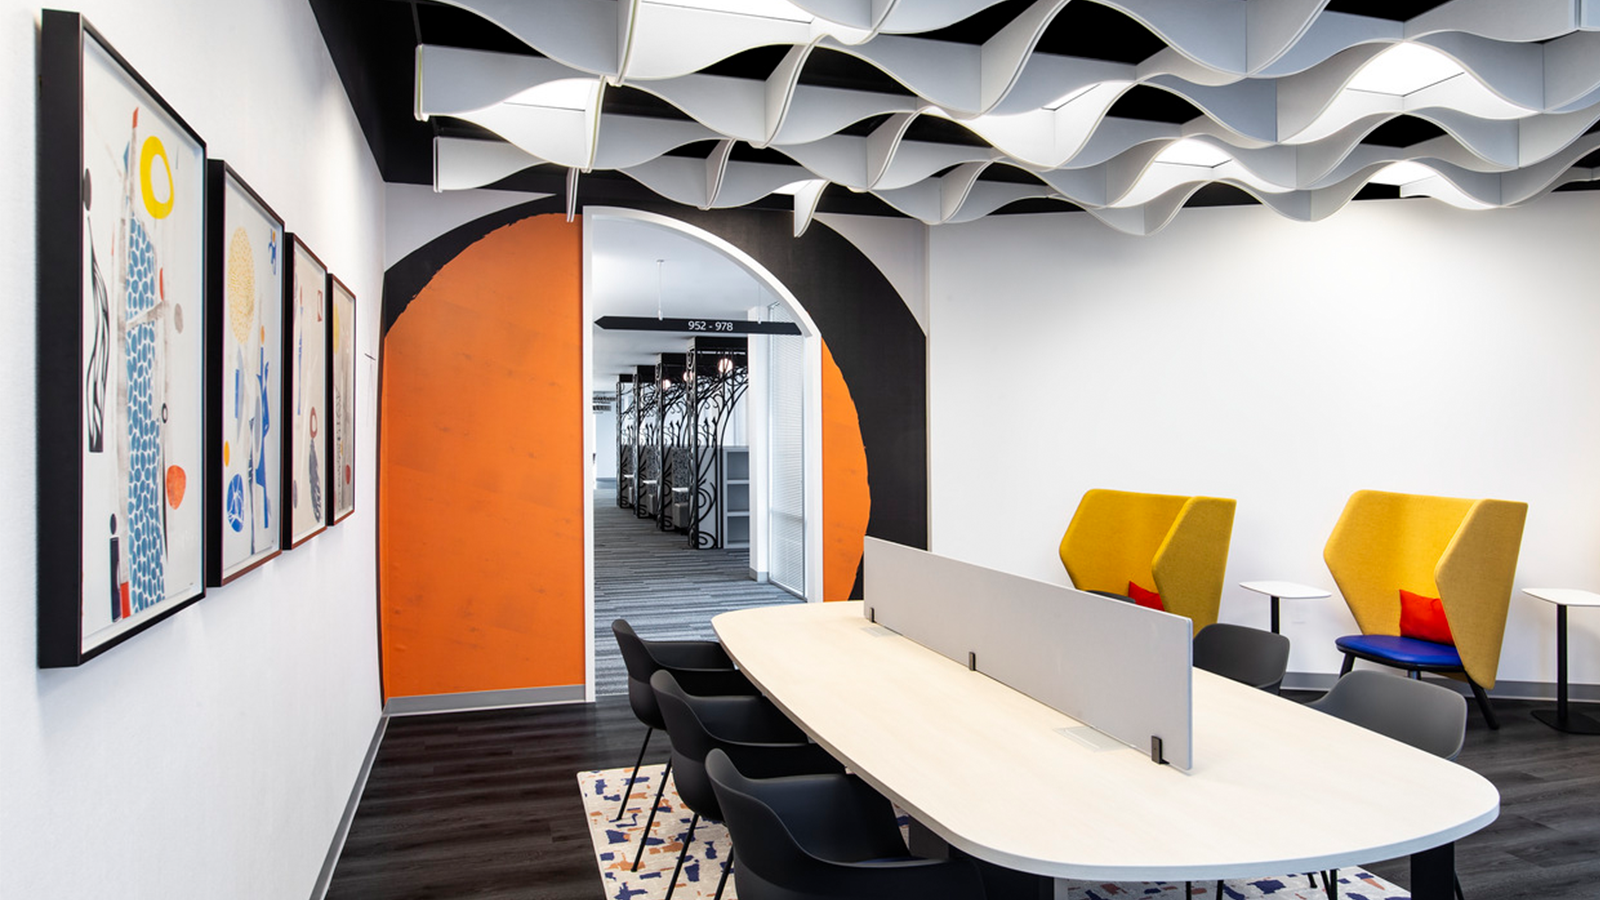 A conference room inspired by Barcelona